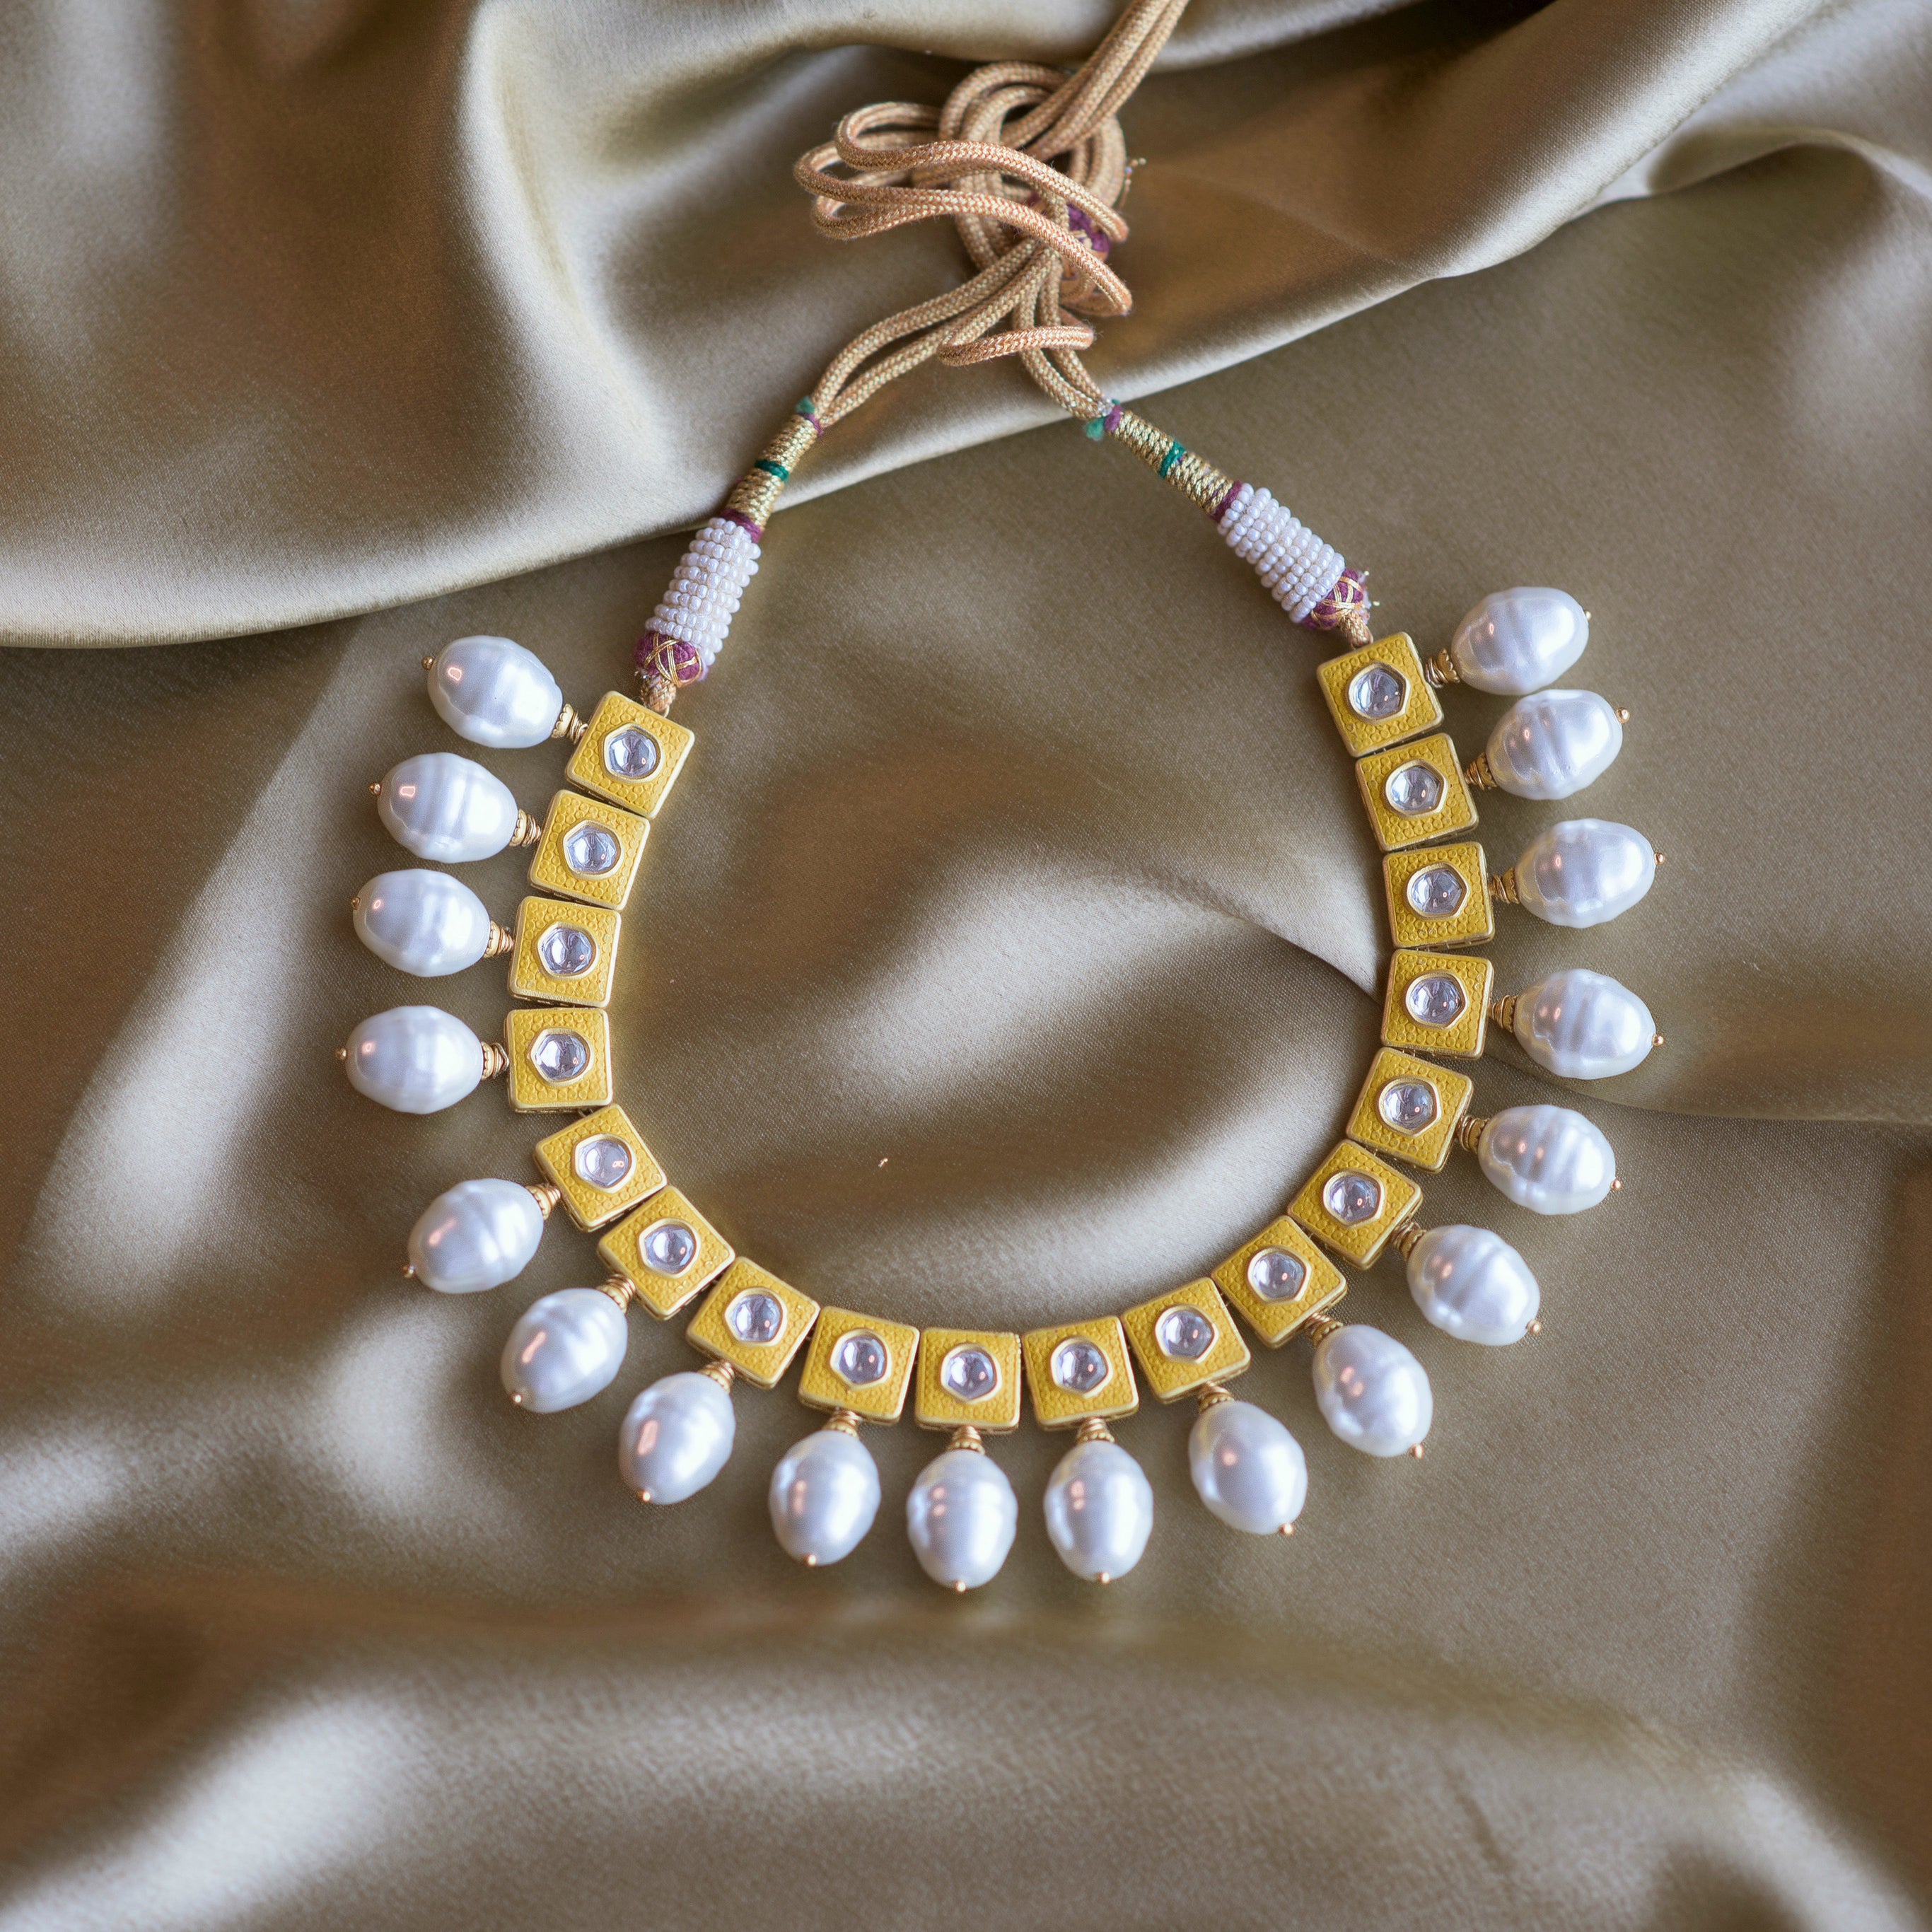 Yellow Lily Necklace with Pearl Drops - Timeless Jewels by Shveta 